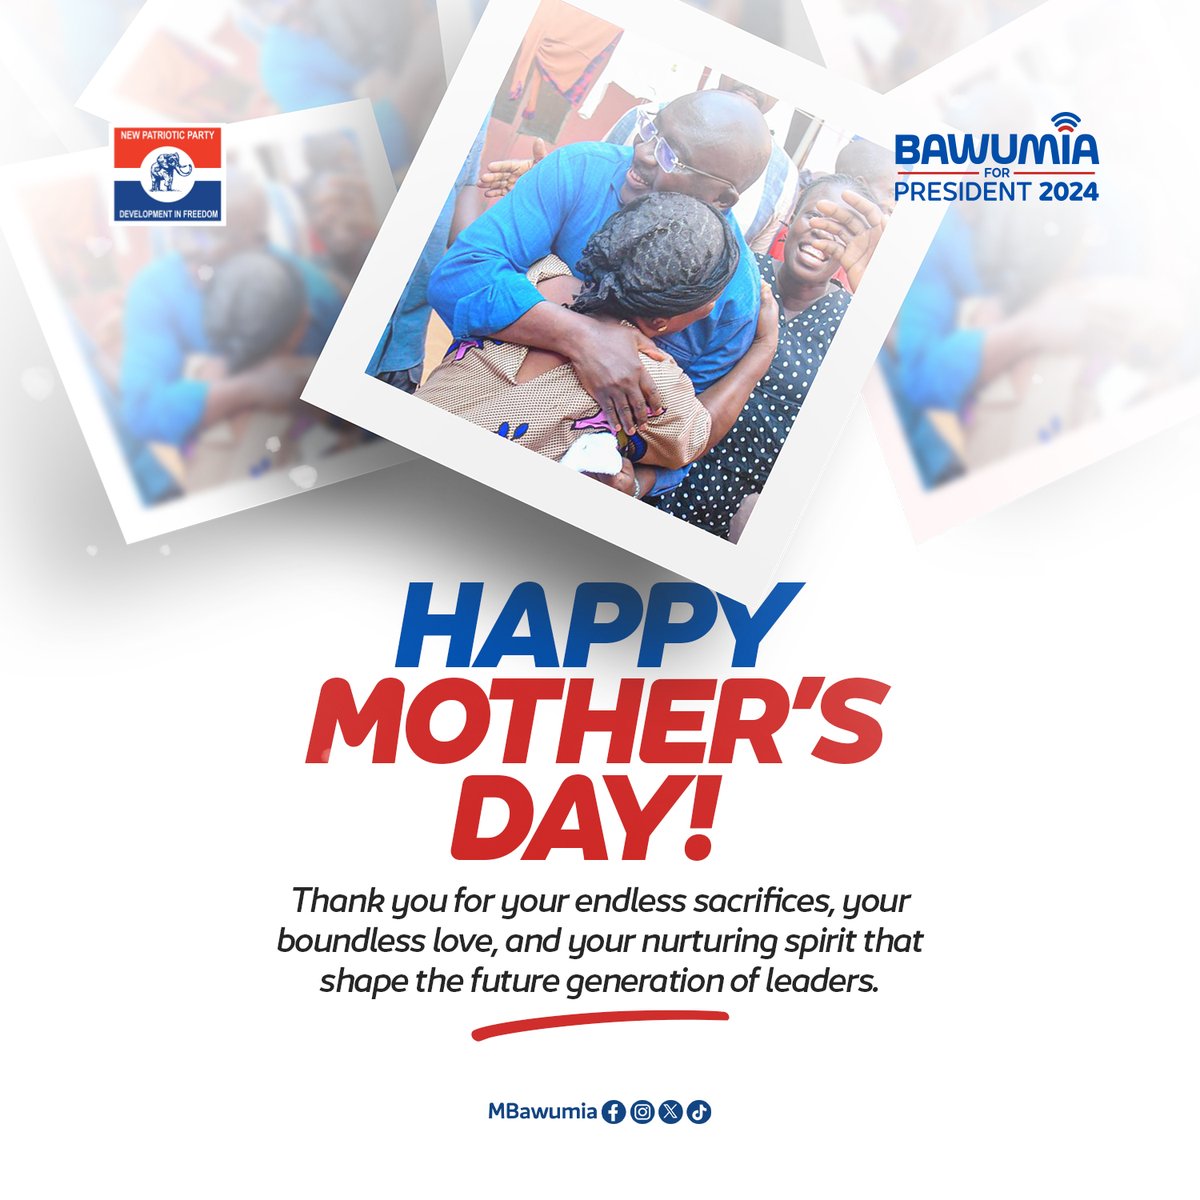 On this special day, we honour and celebrate our incredible mothers. Your strength, love, and unwavering dedication inspire us all. Today, and every day, we salute you, cherish you, and stand with you in gratitude and admiration. #MothersDay #celebratingmothers